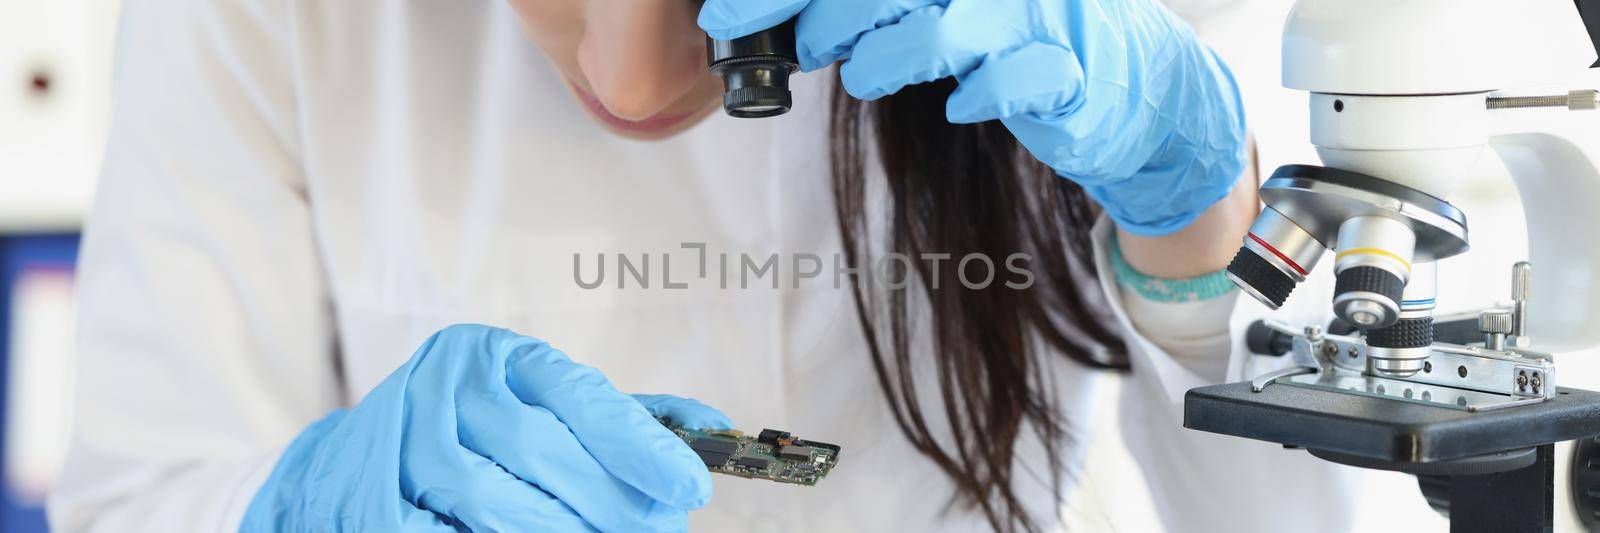 Woman examine part of digital device with magnifying glass by kuprevich